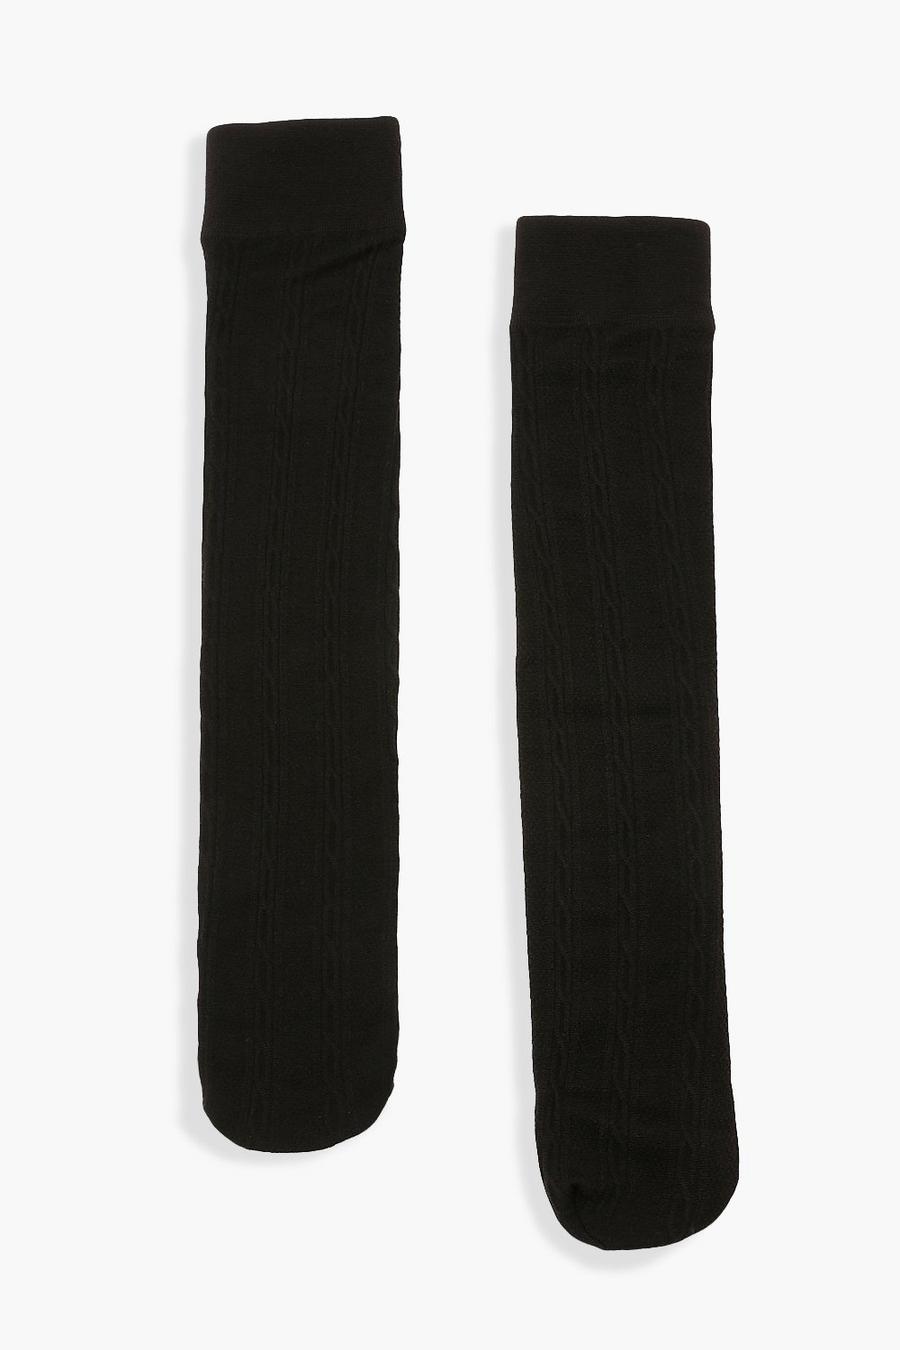 2er-Pack kniehohe Thermo-Socken mit Zopfmuster, Black image number 1